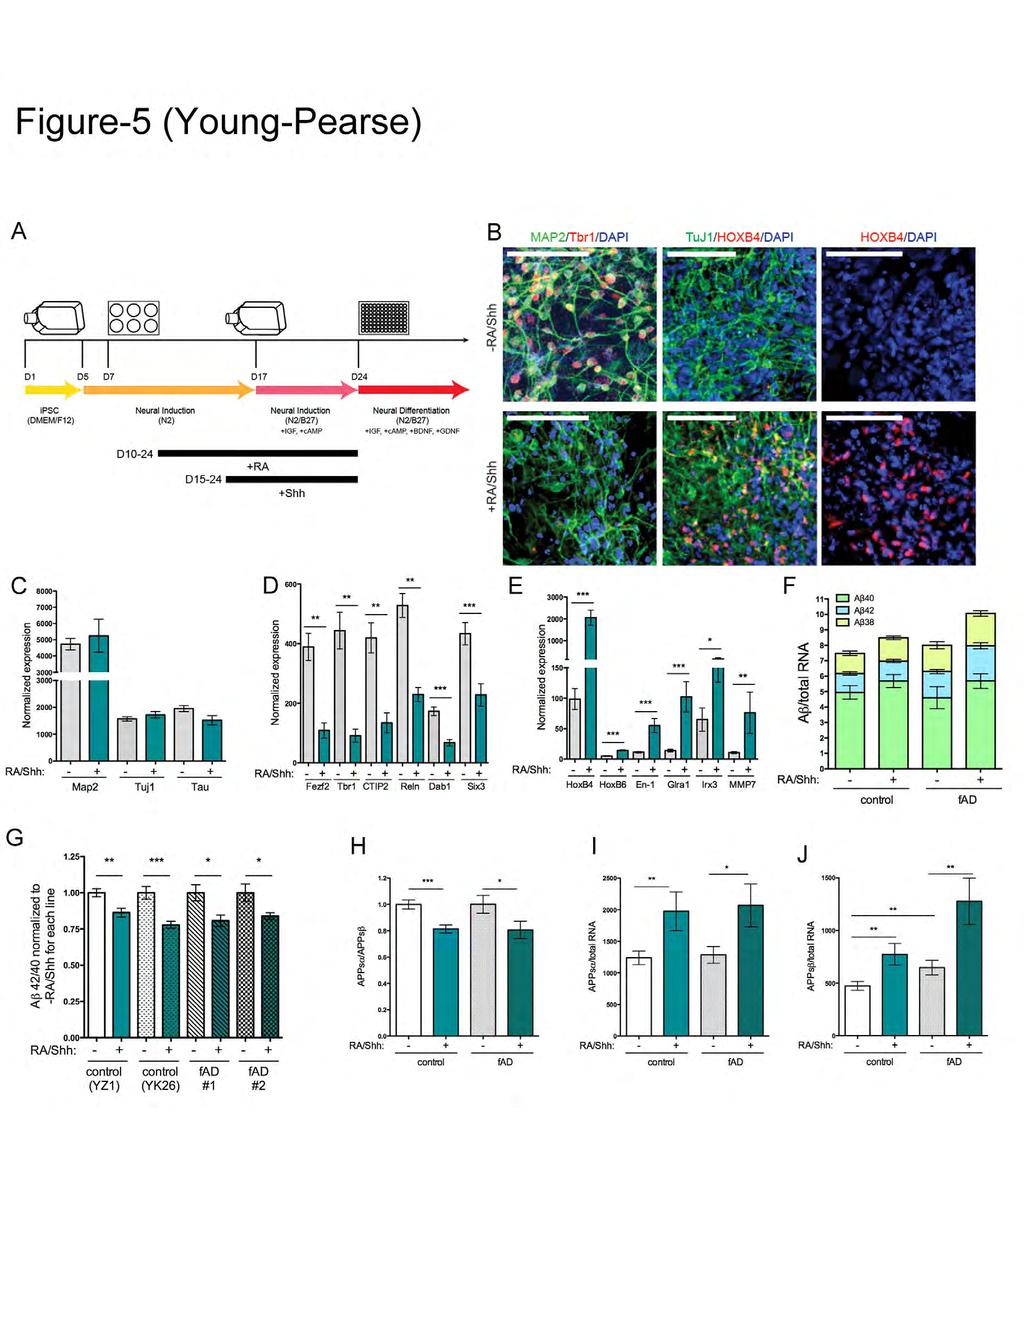 ipscs directed to caudal neuronal fates show altered expression profiles Normalized expression 8000 7000 6000 5000 4000 3000 3000 2000 1000 Normalized expression 600 400 200 ** ** ** ** Normalized